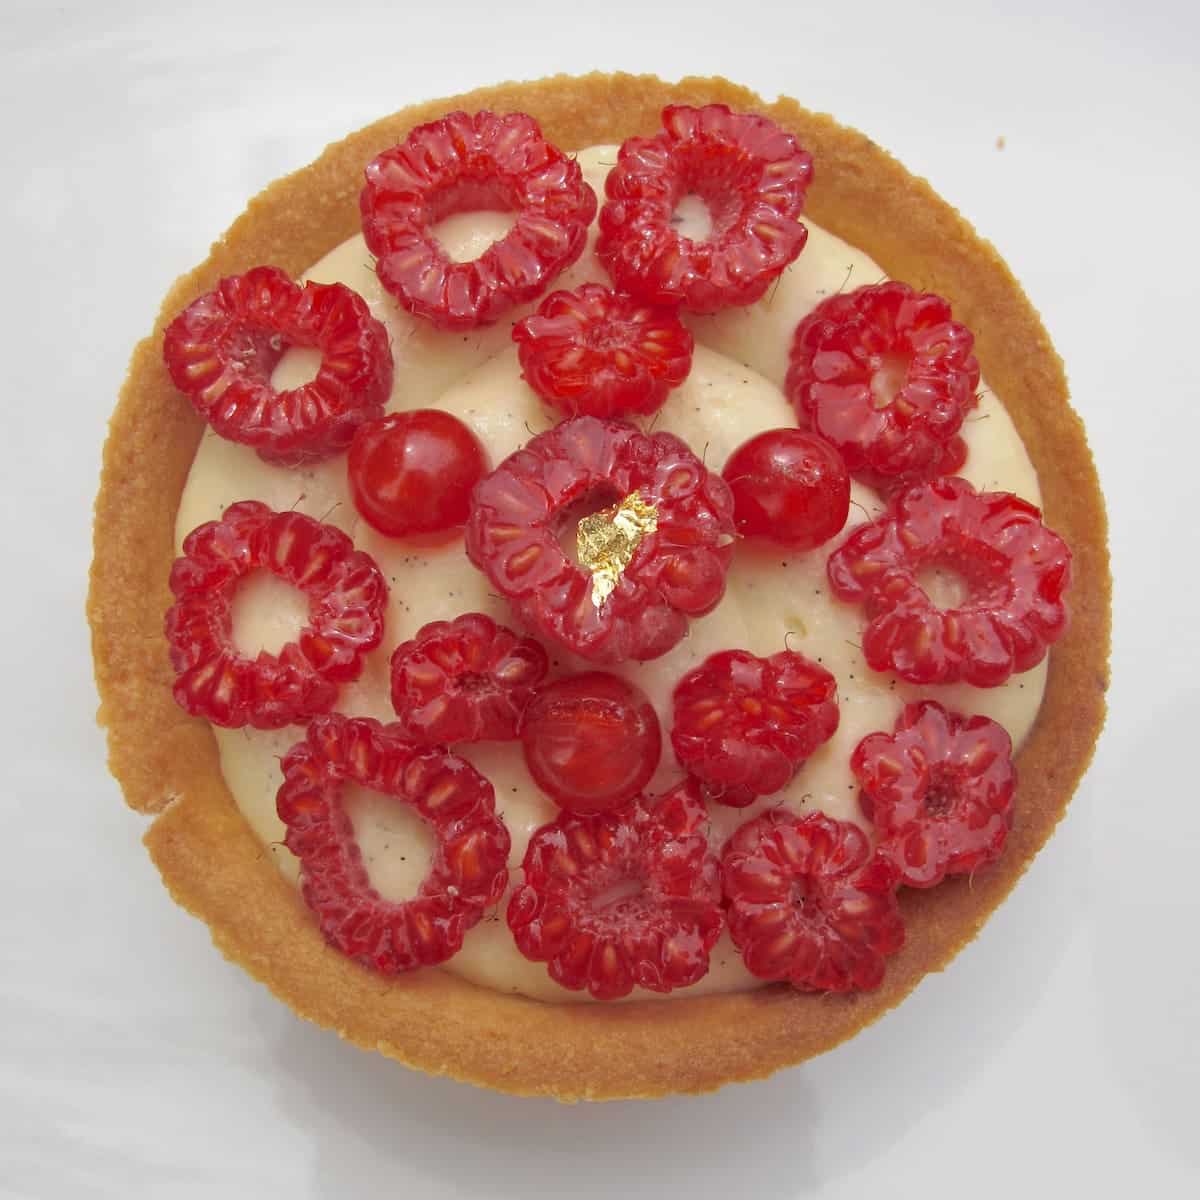 golden crusted French tart with vanilla cream and chopped raspberries